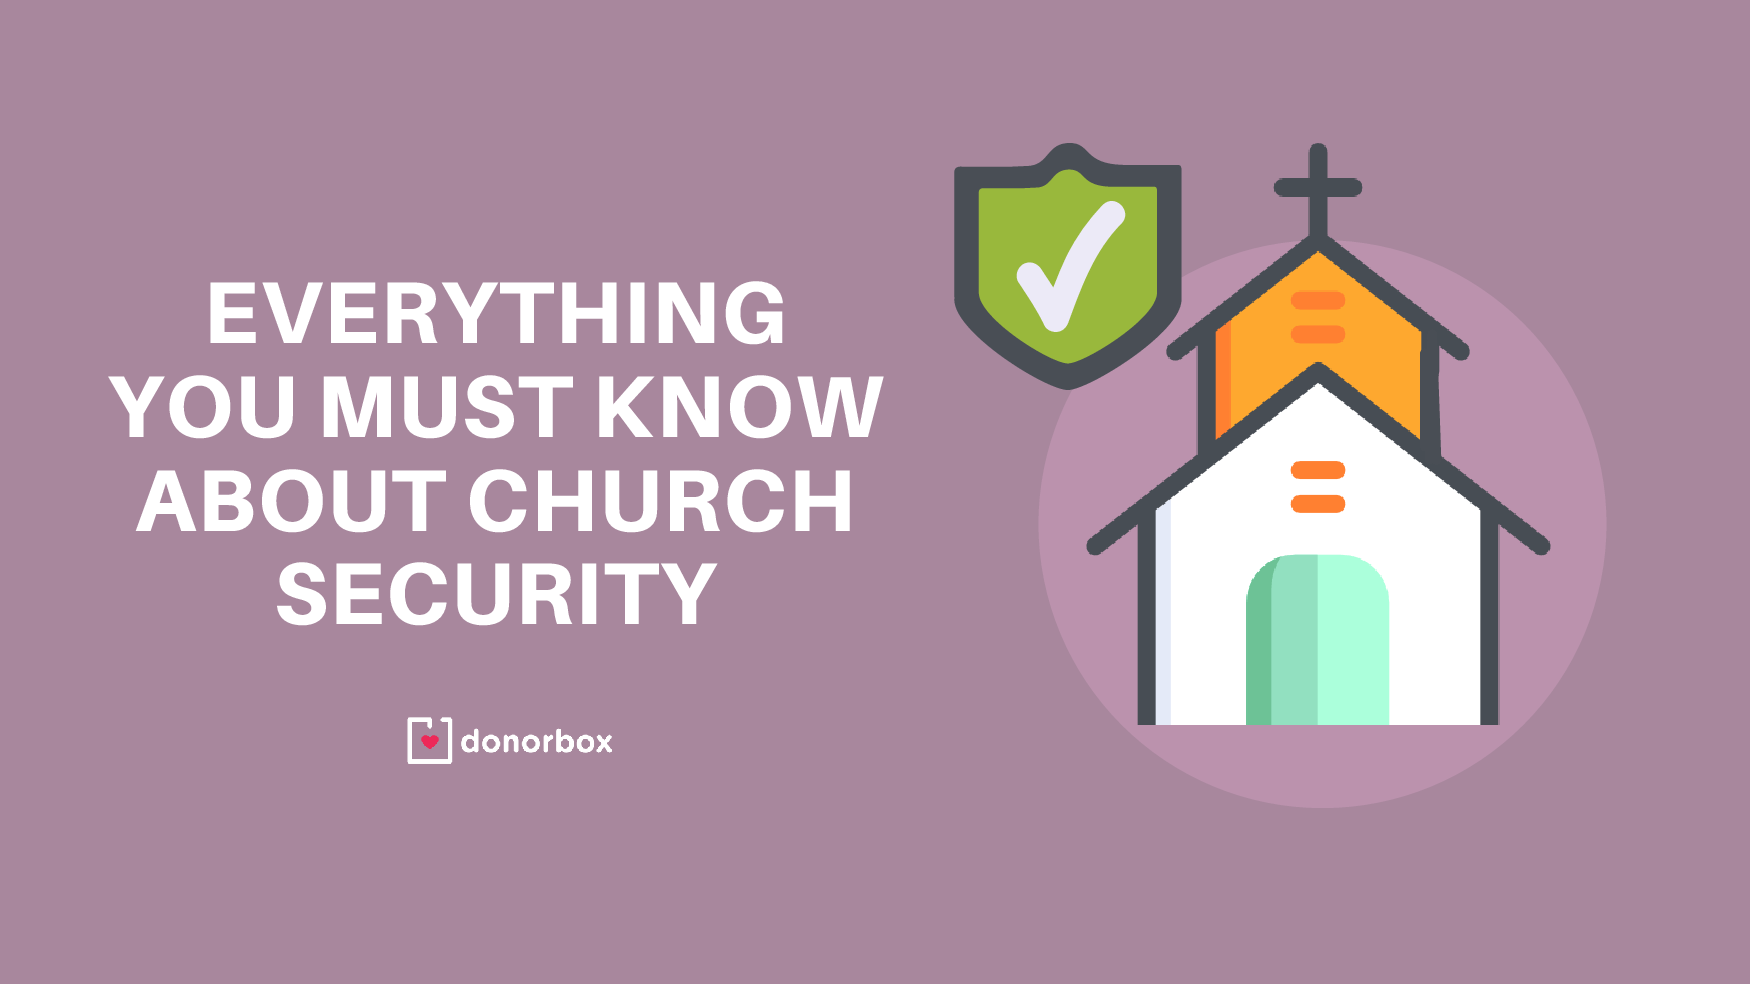 Everything You Must Know About Church Security – A Comprehensive Guide